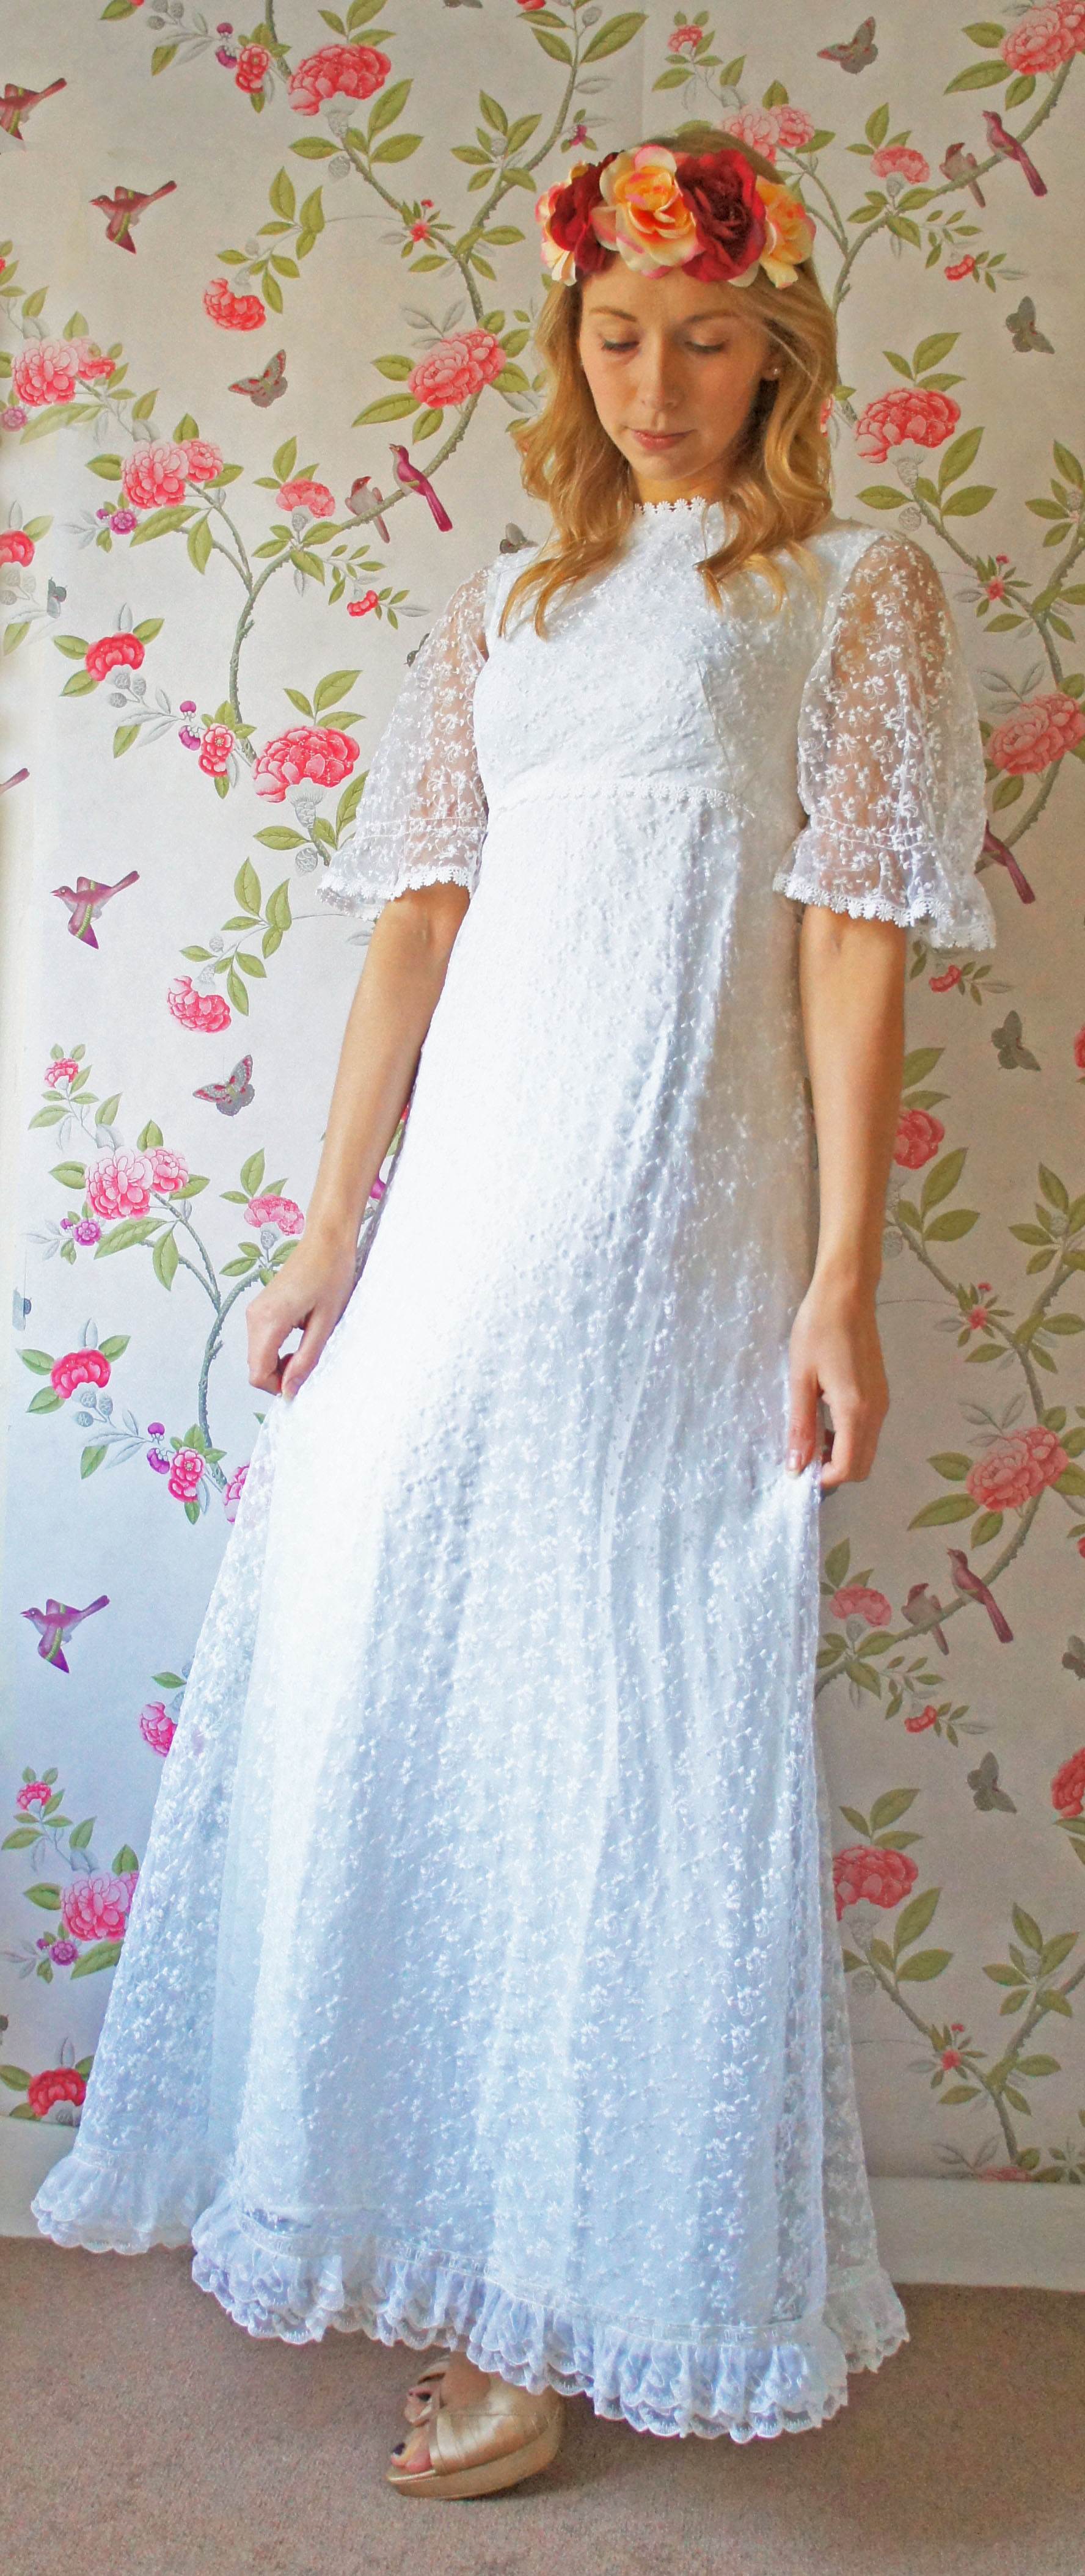 1970s vintage wedding dress from Sincerely Bea Bridal as featured on The National Vintage Wedding Fair blog